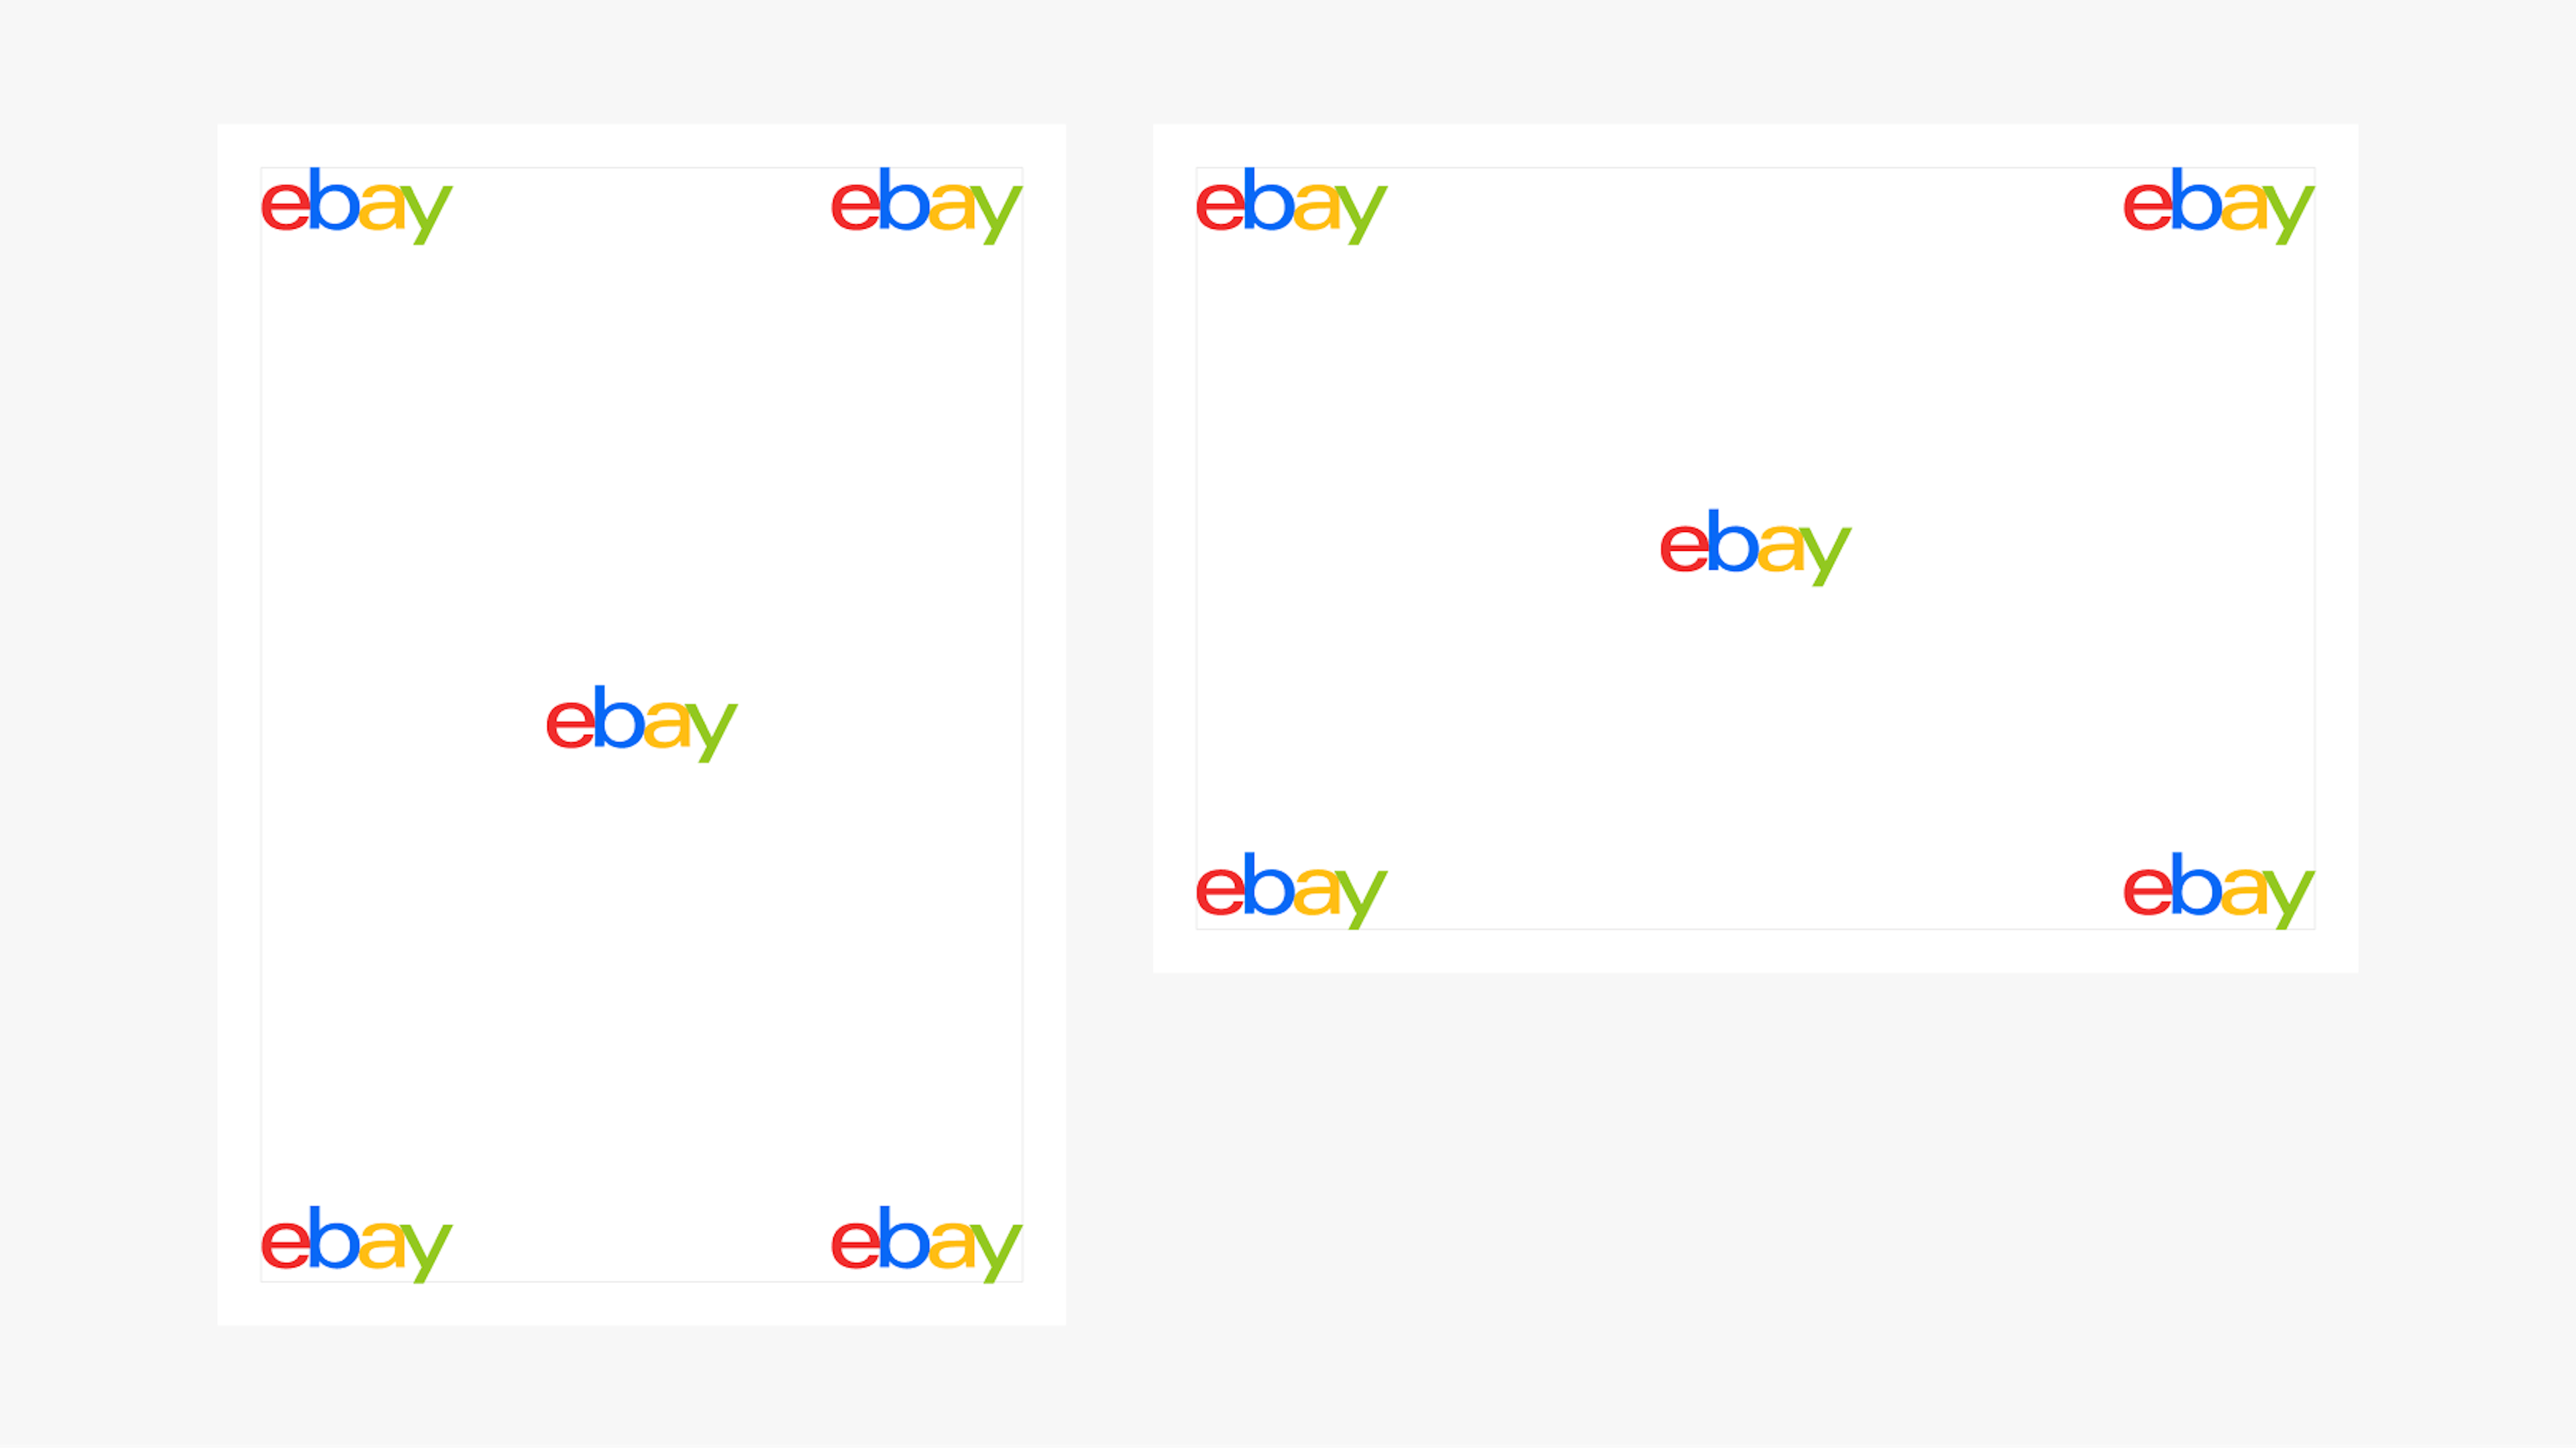 A portrait and landscape design layout detailing the placement of the eBay logo in the center, upper left, upper right, lower left, and lower right corners.